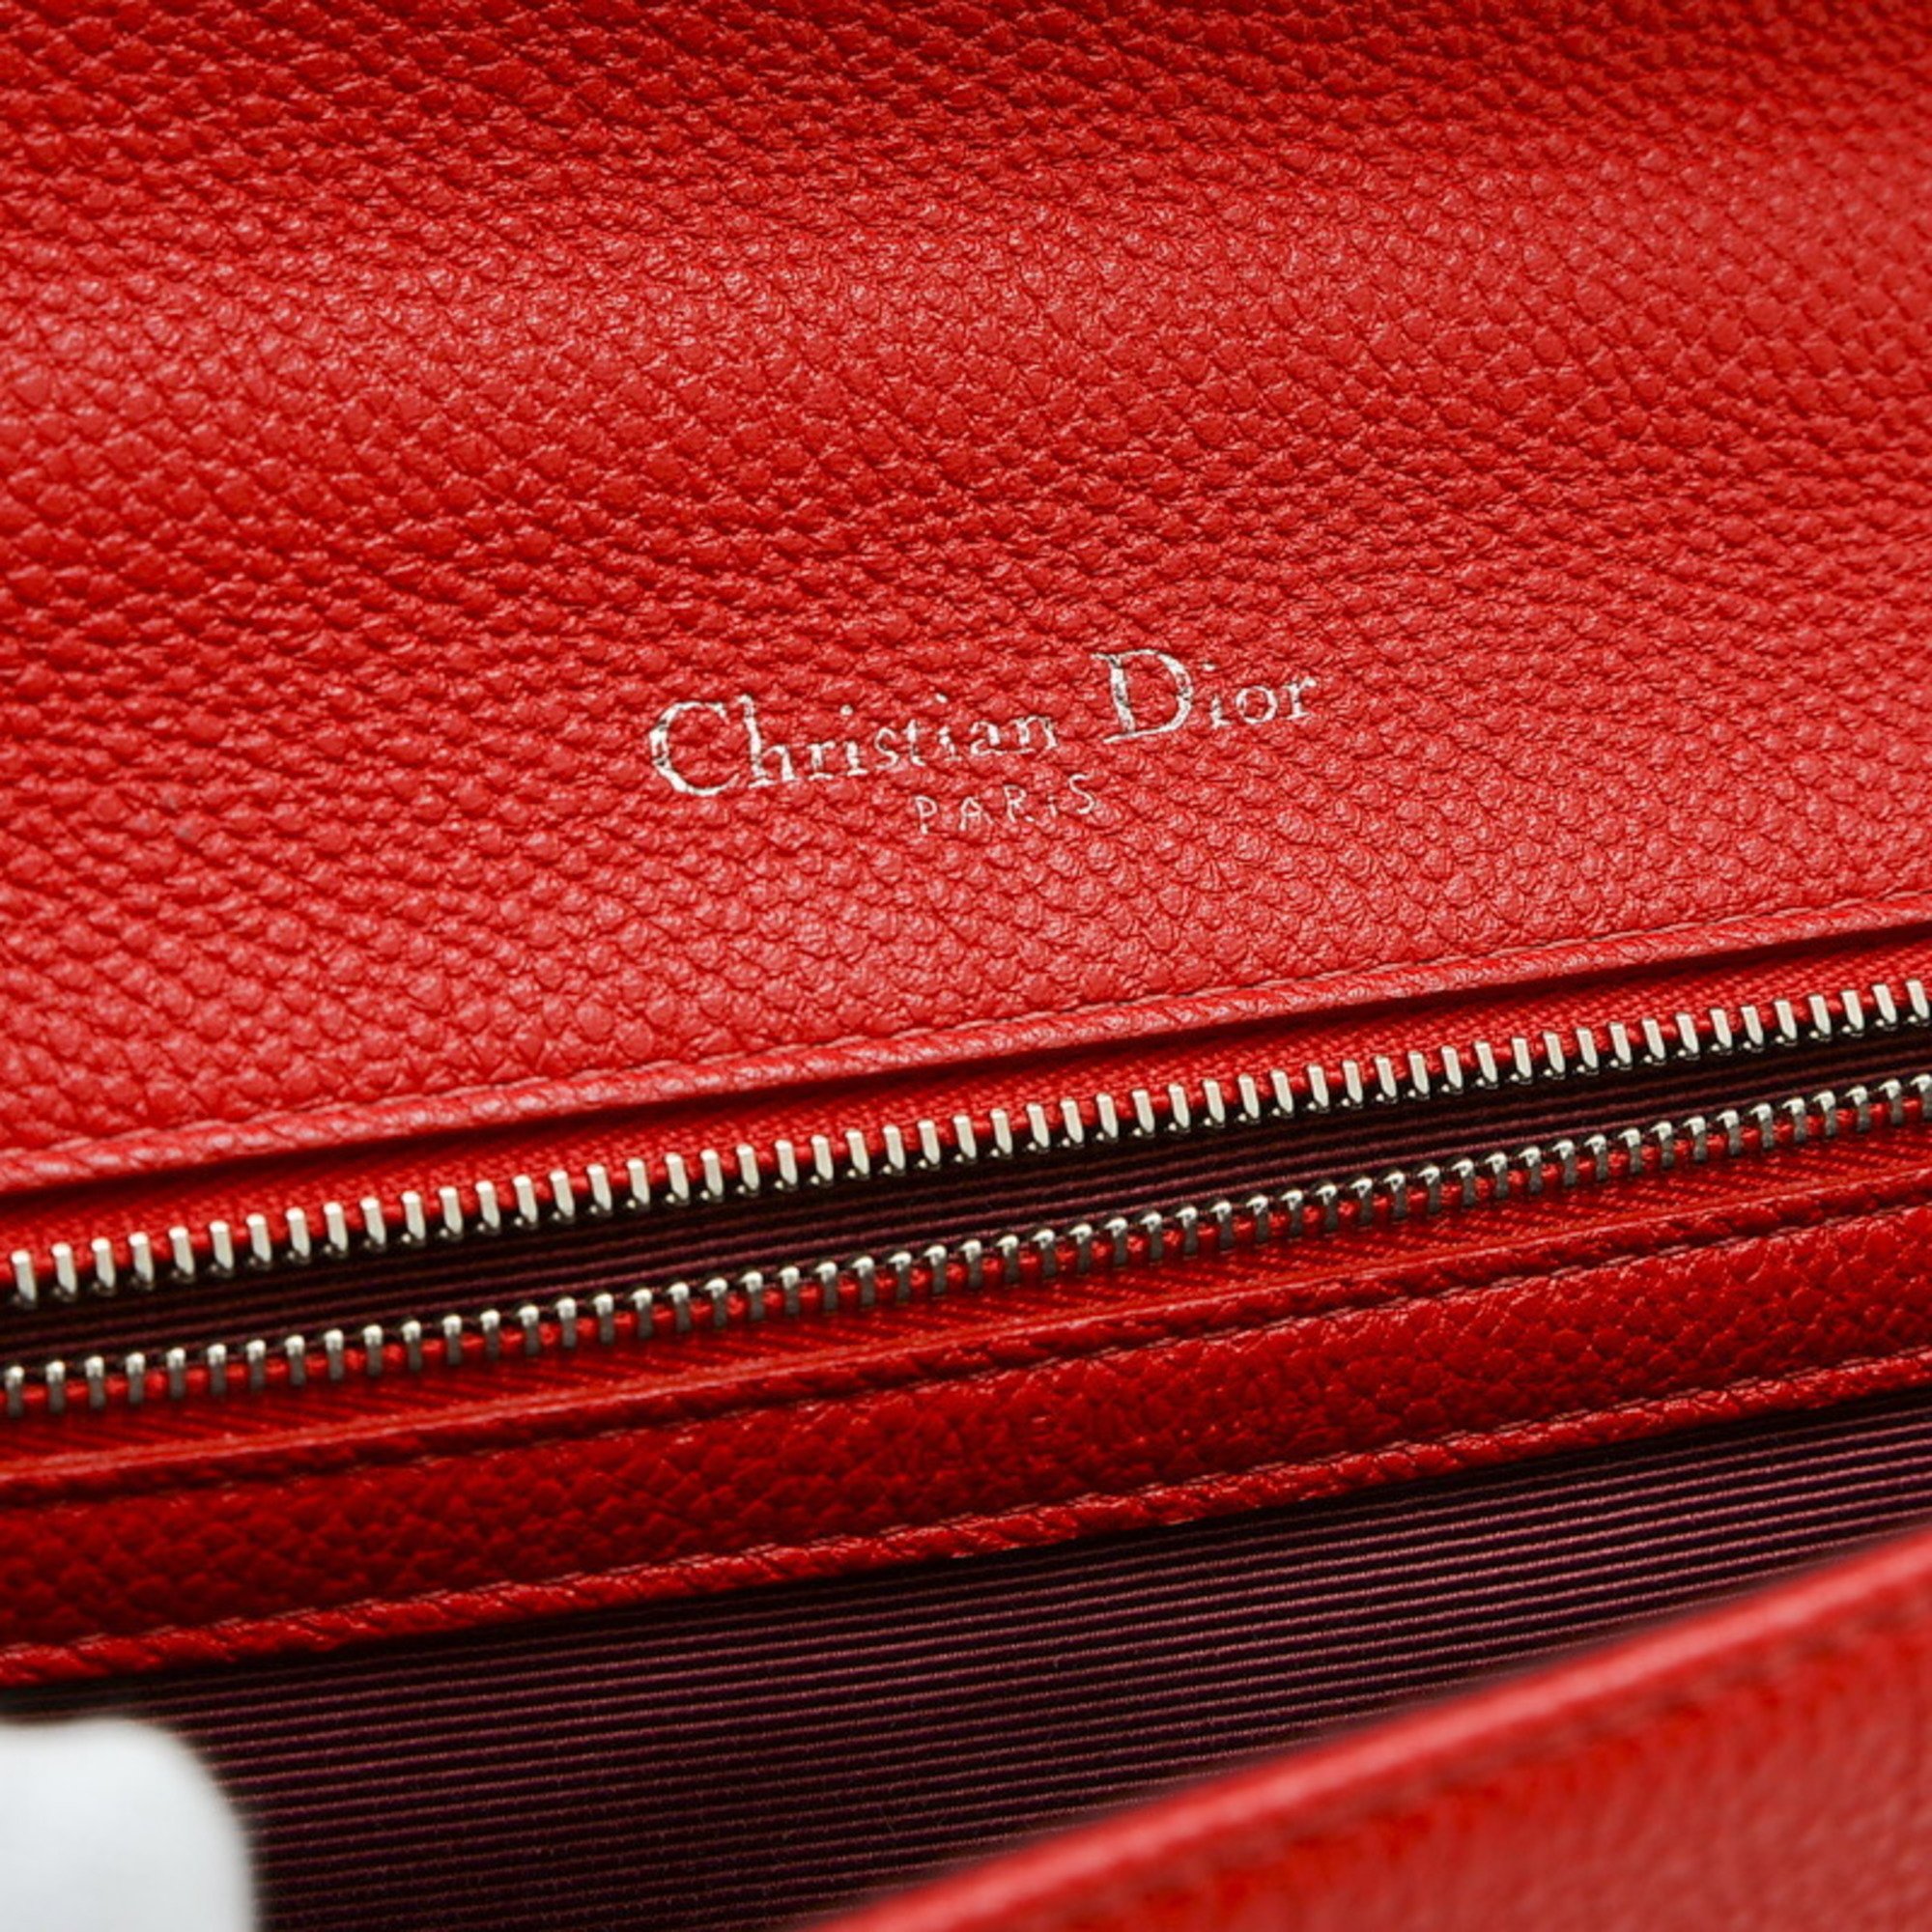 Christian Dior Dior Diorama Chain Shoulder Bag Leather Red